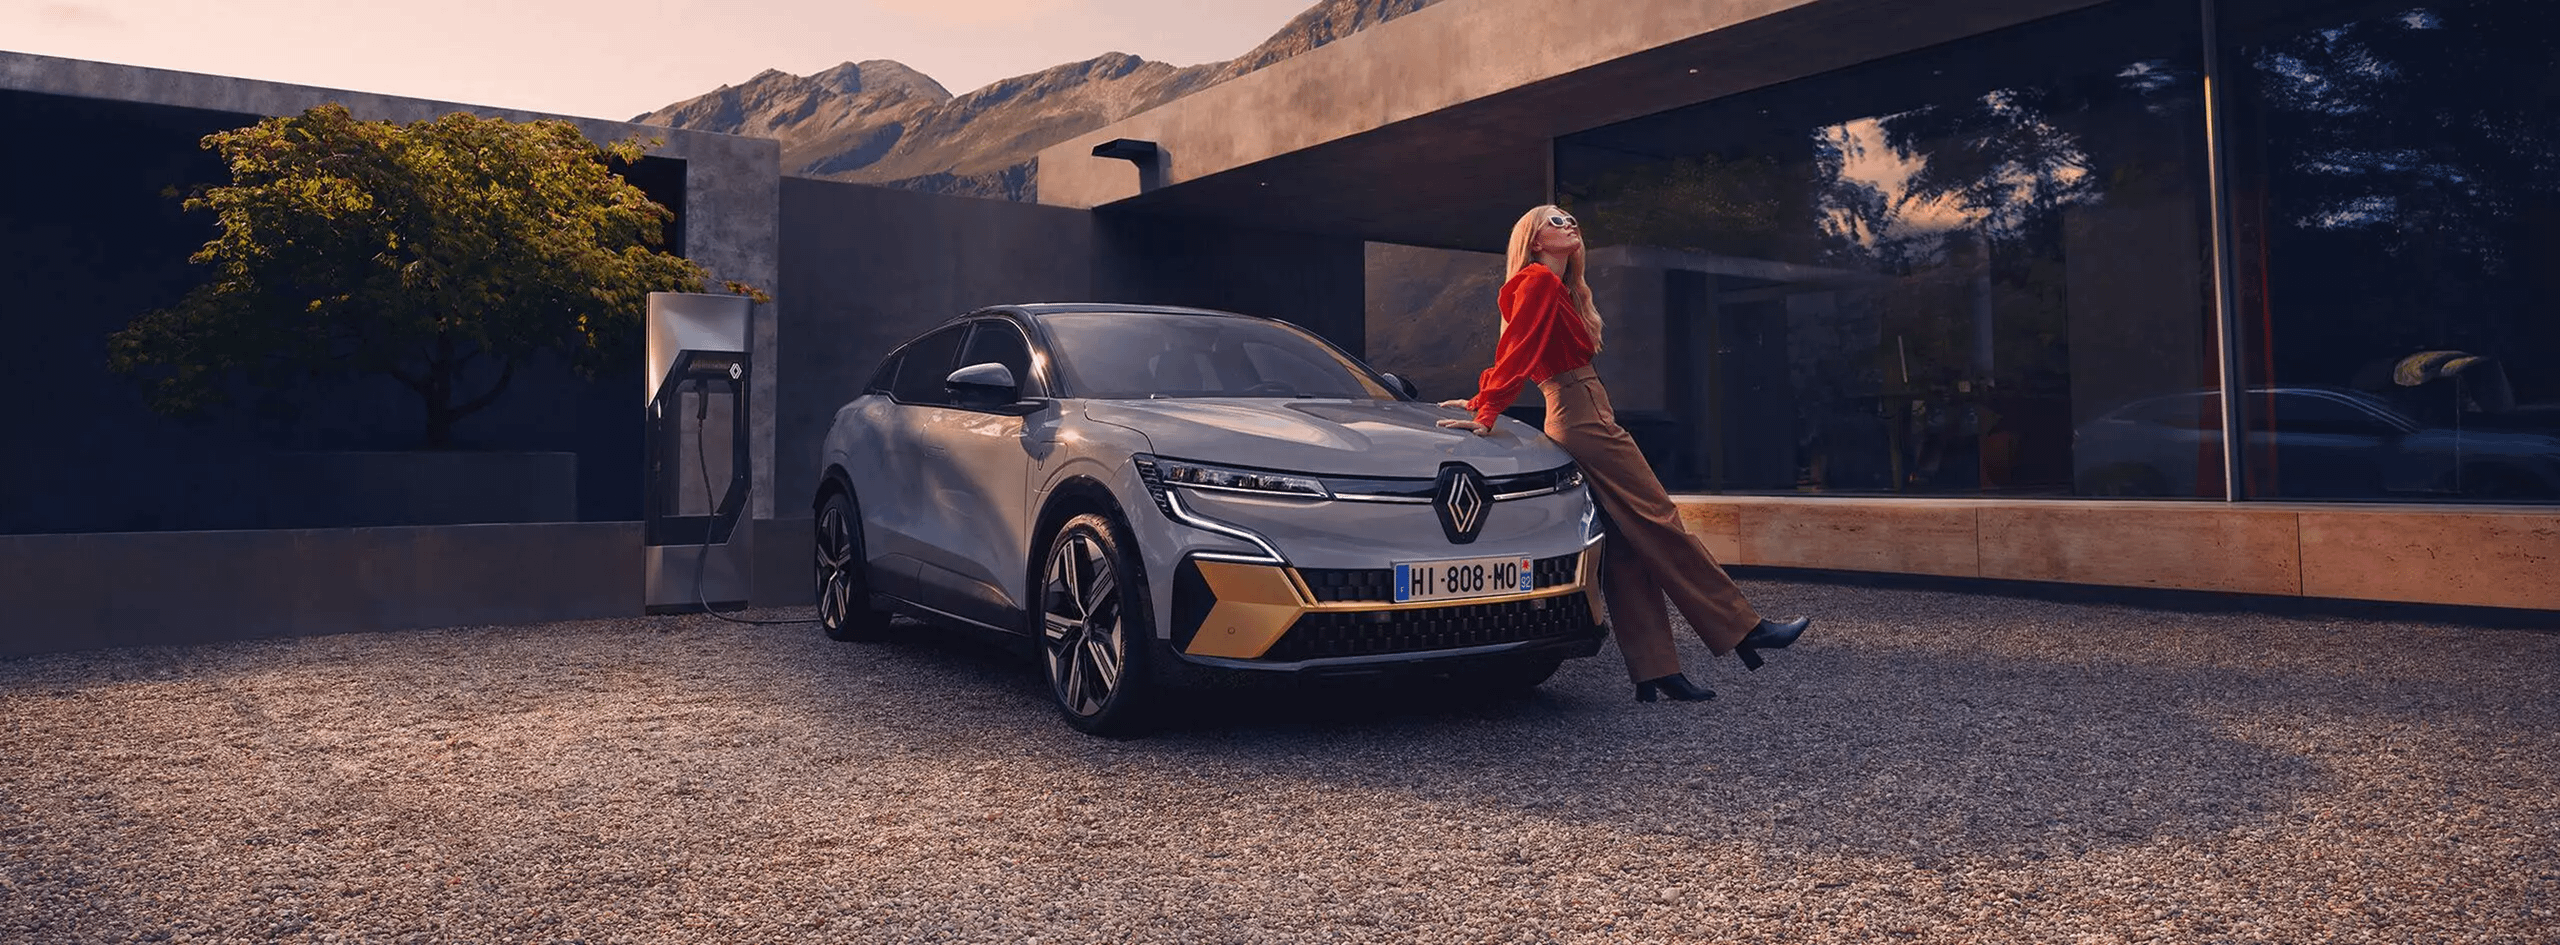 All New Renault Megane E-Tech 100% Electric